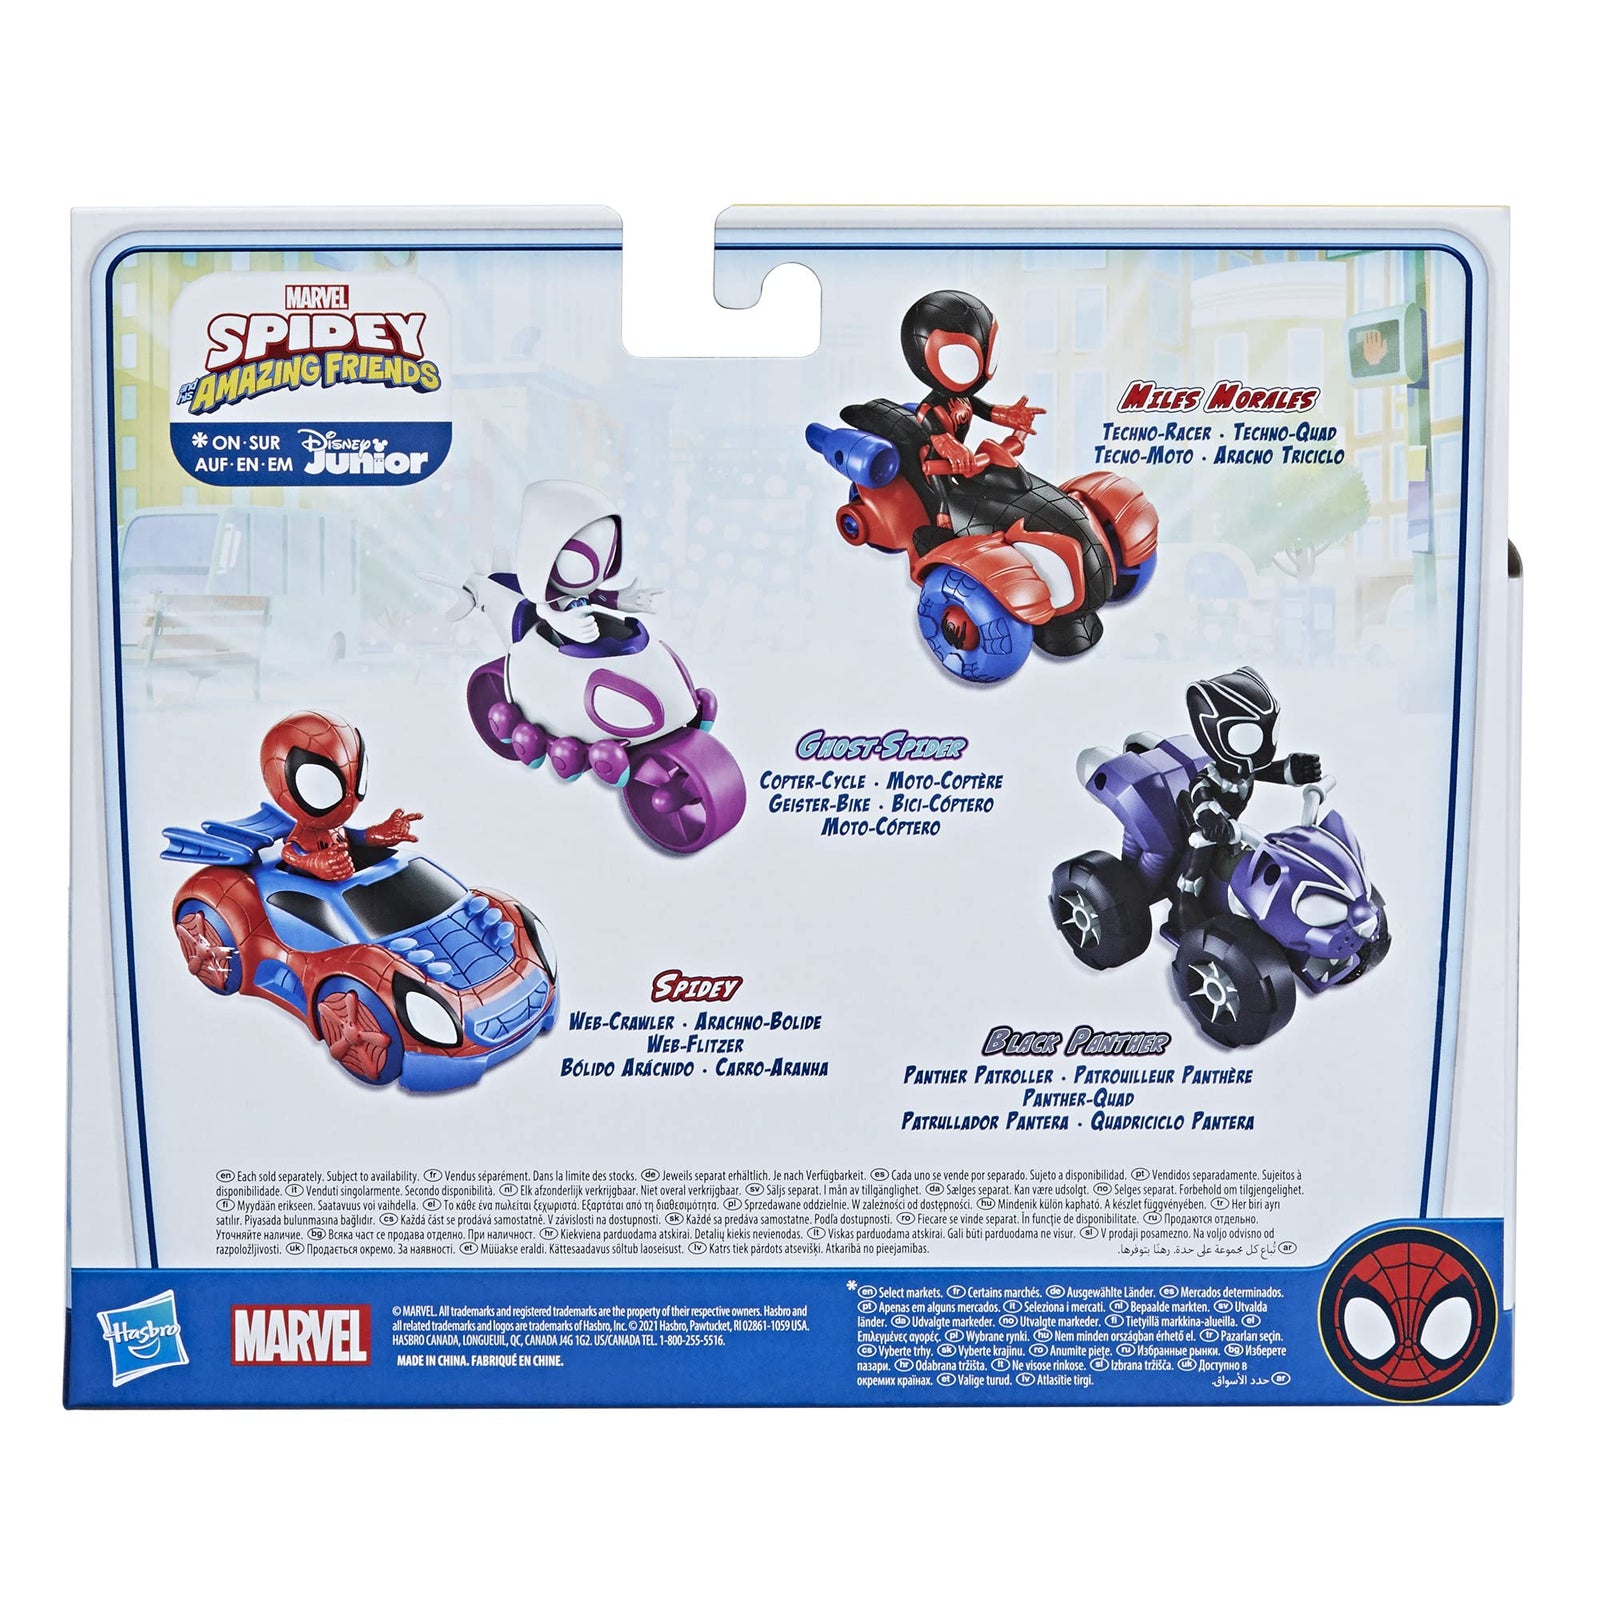 Marvel Spidey and His Amazing Friends Black Panther Action Figure and Panther Patroller Vehicle, for Kids Ages 3 and Up